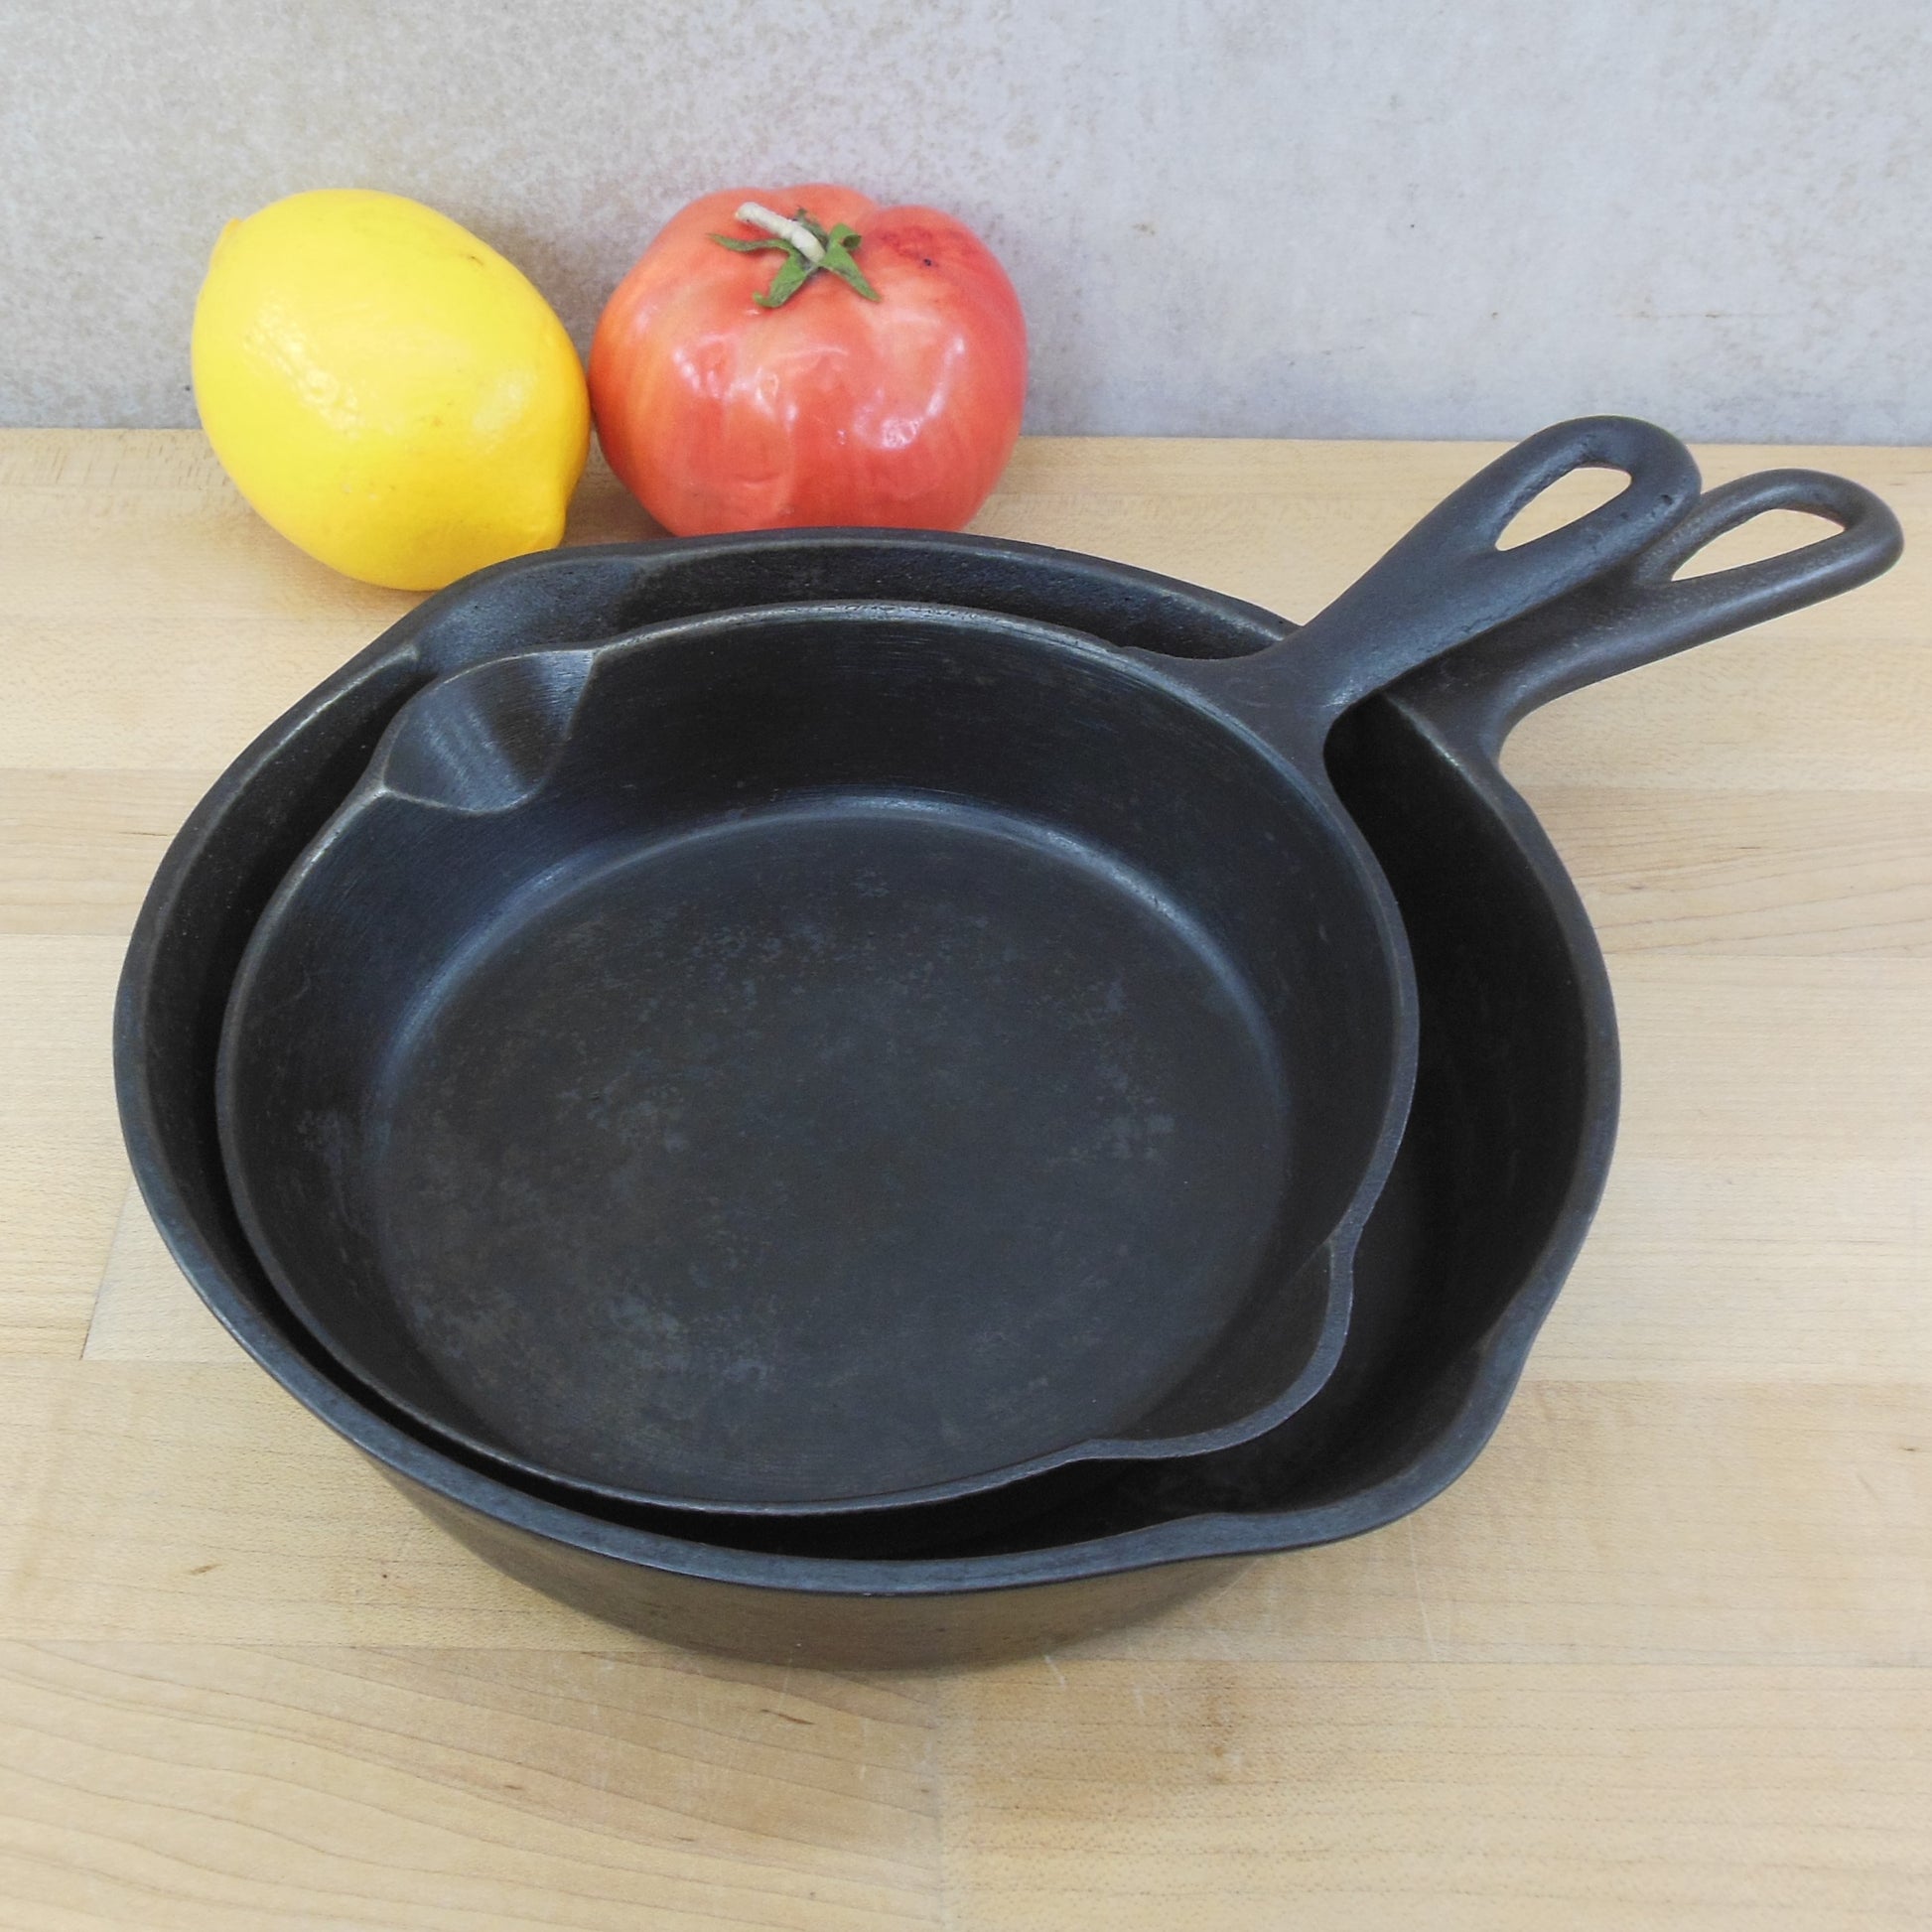 Unmarked Maker #3 #5 Cast Iron Skillets Pair